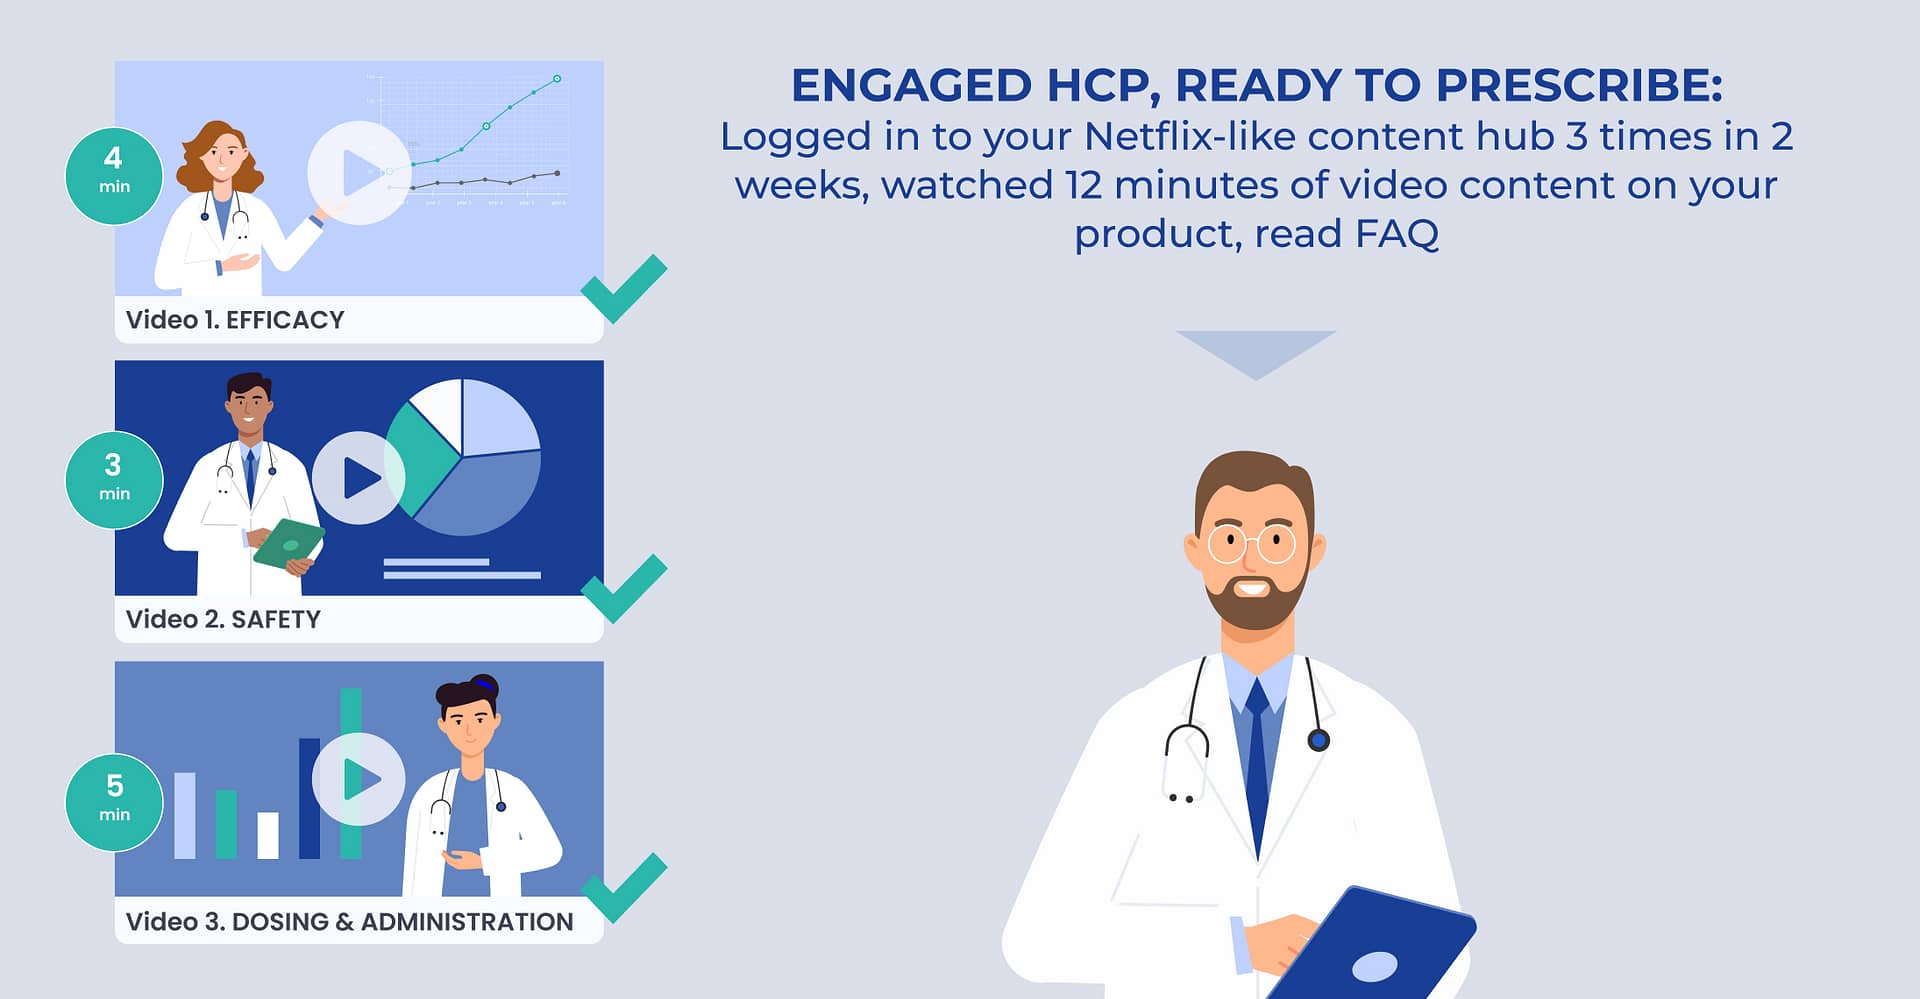 hcp engagement time analysis video content hub